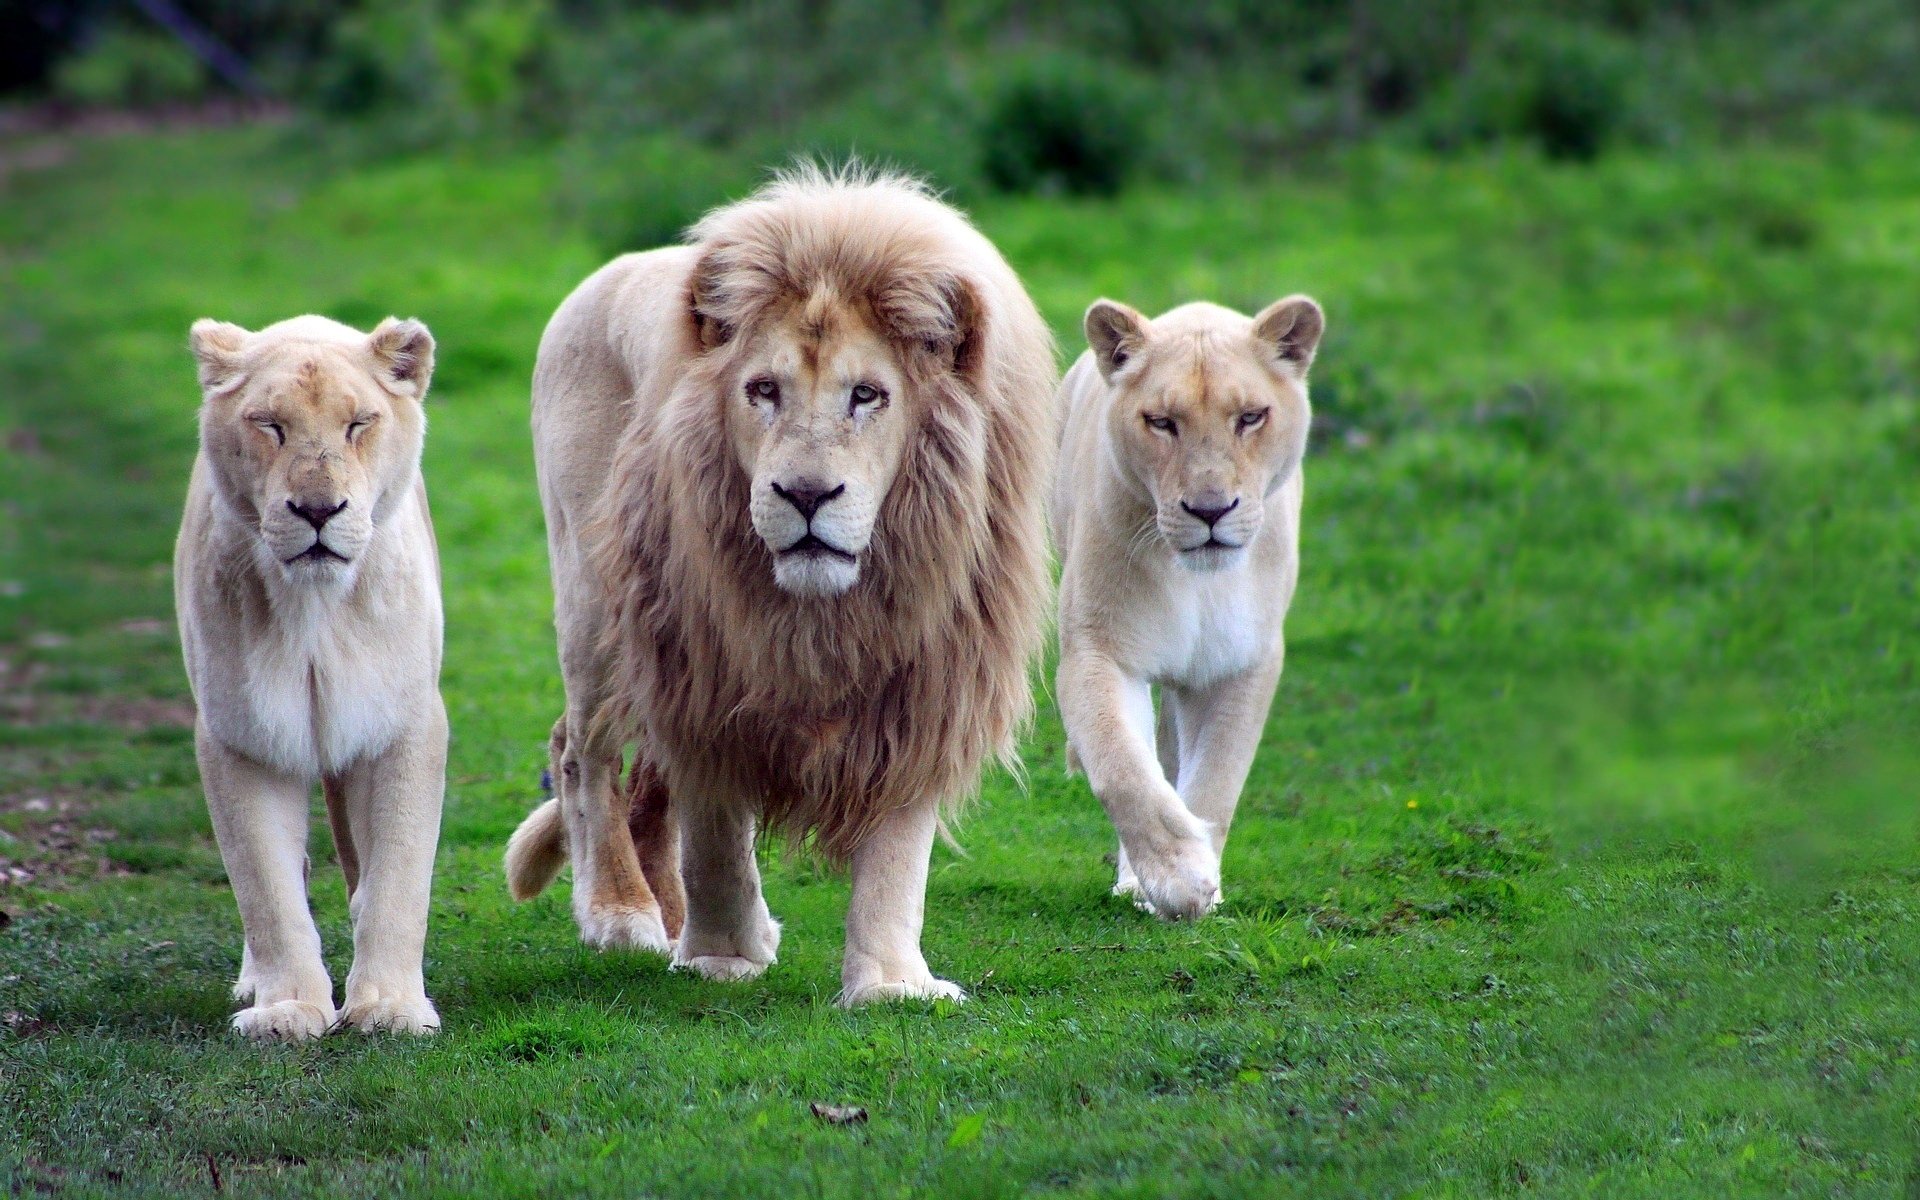 High Resolution Wallpaper - Two Lionesses And One Lion - HD Wallpaper 